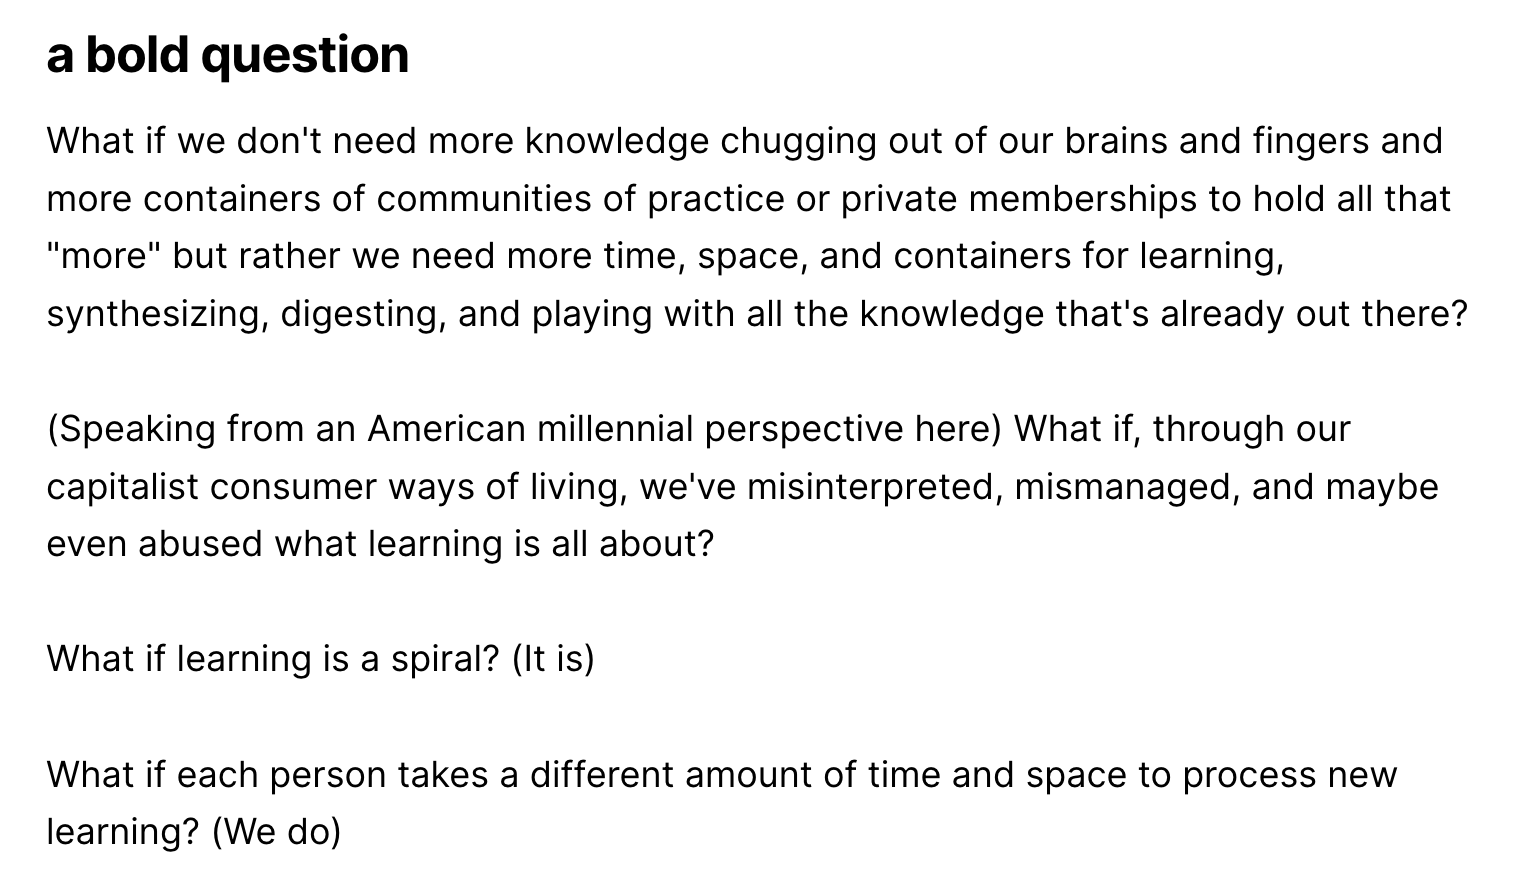 a screenshot of a few paragraphs of text from the Supportive Spiral page ('a bold question' to 'What if each person takes a different amount of time and space to process new learning? (We do)'